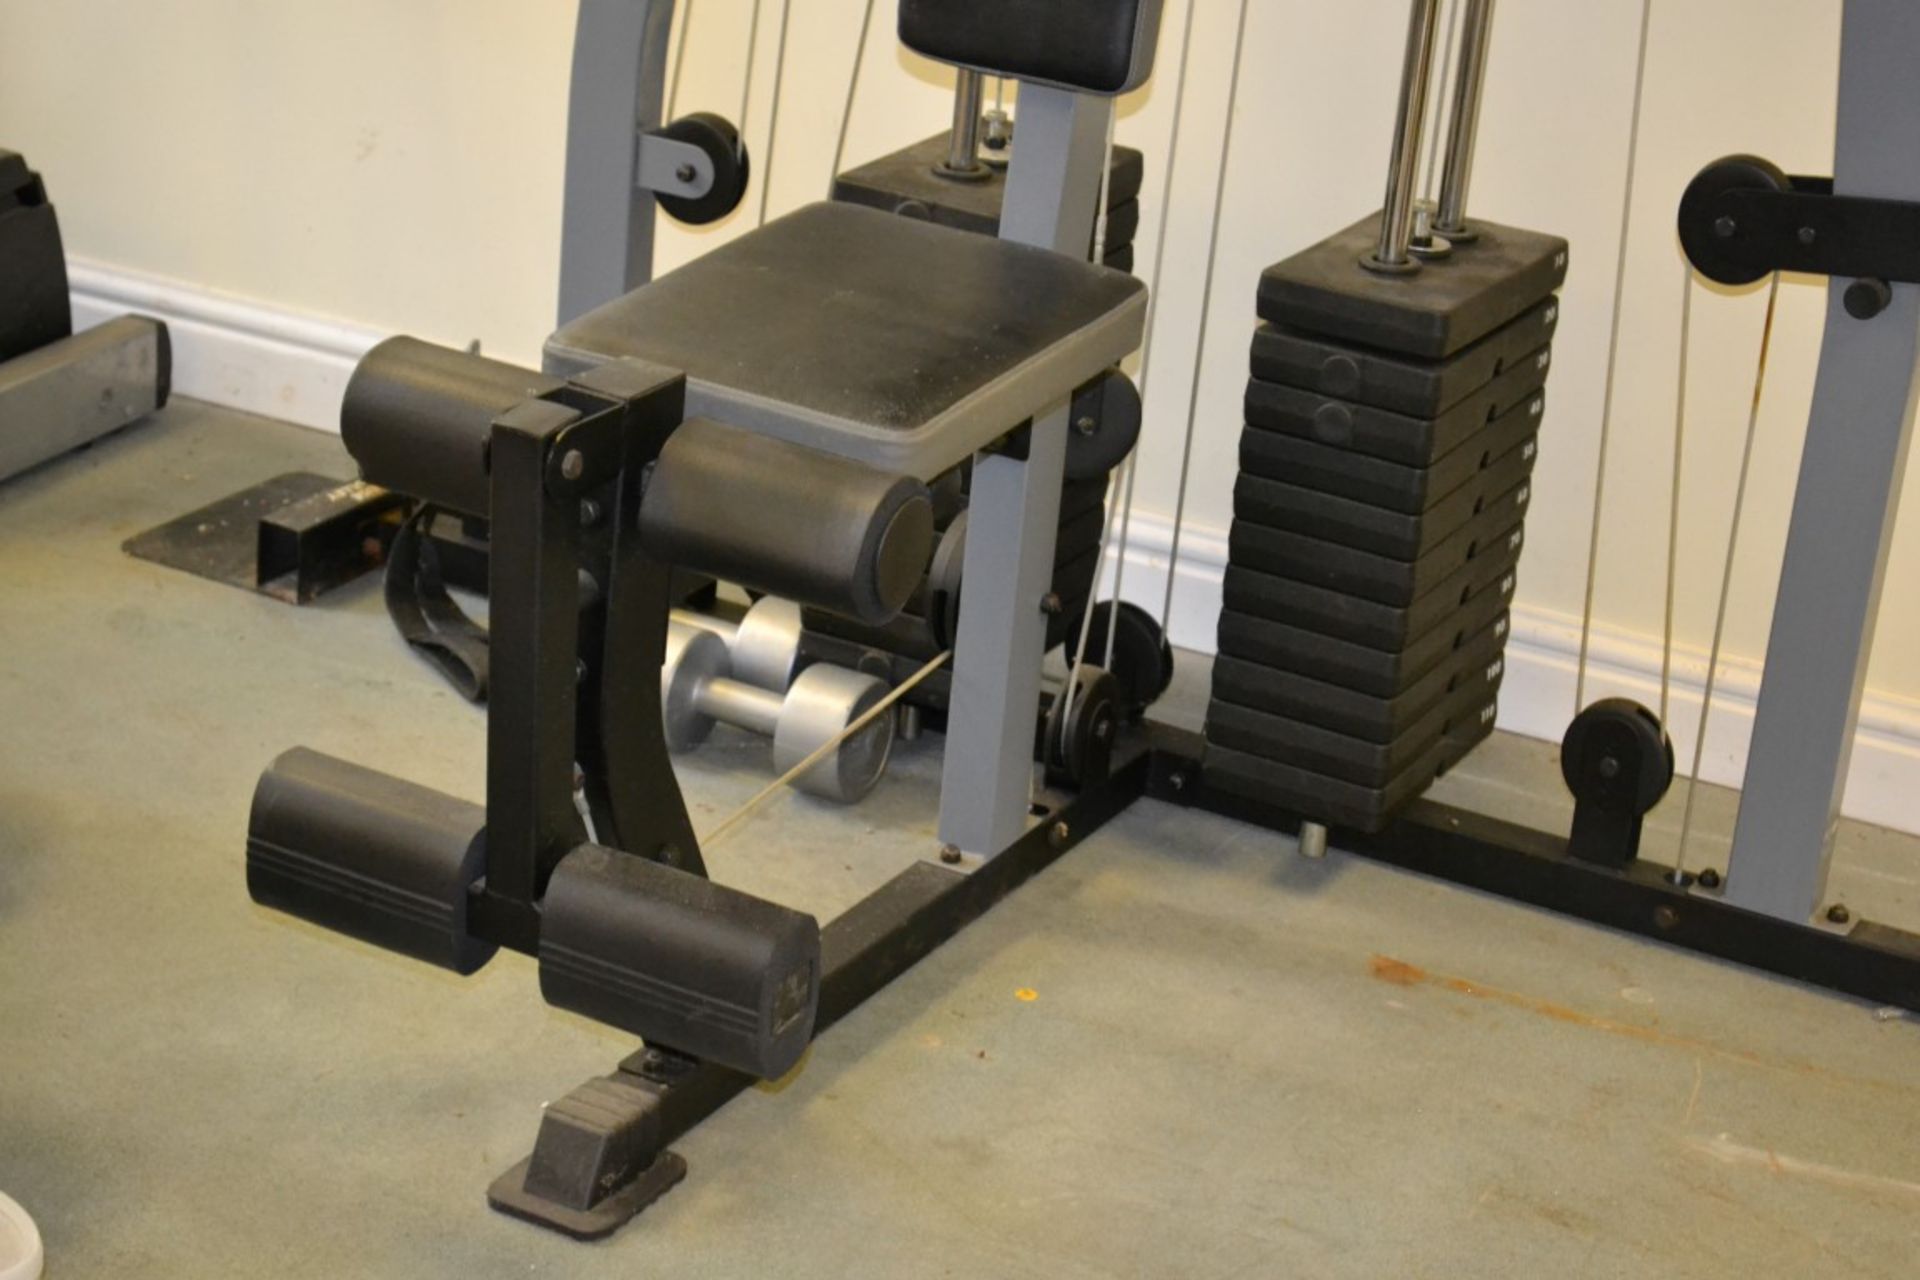 1 x Weider Pro 9400 Multi Gym - From A Clean Manor House Environment In Good Working Condition - - Image 7 of 9